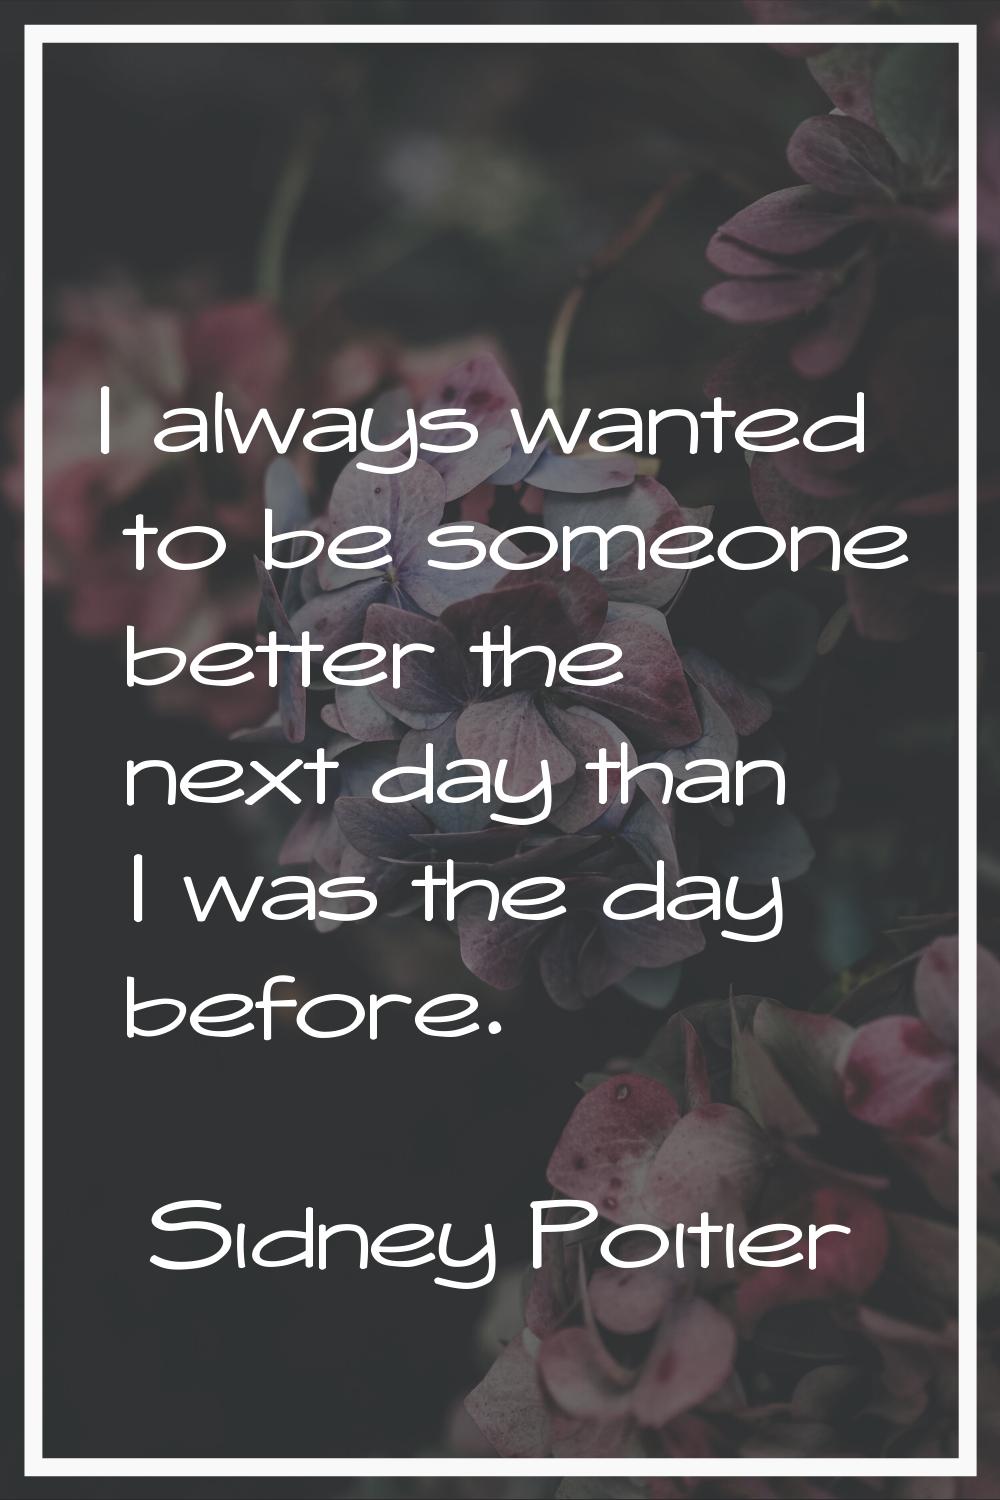 I always wanted to be someone better the next day than I was the day before.